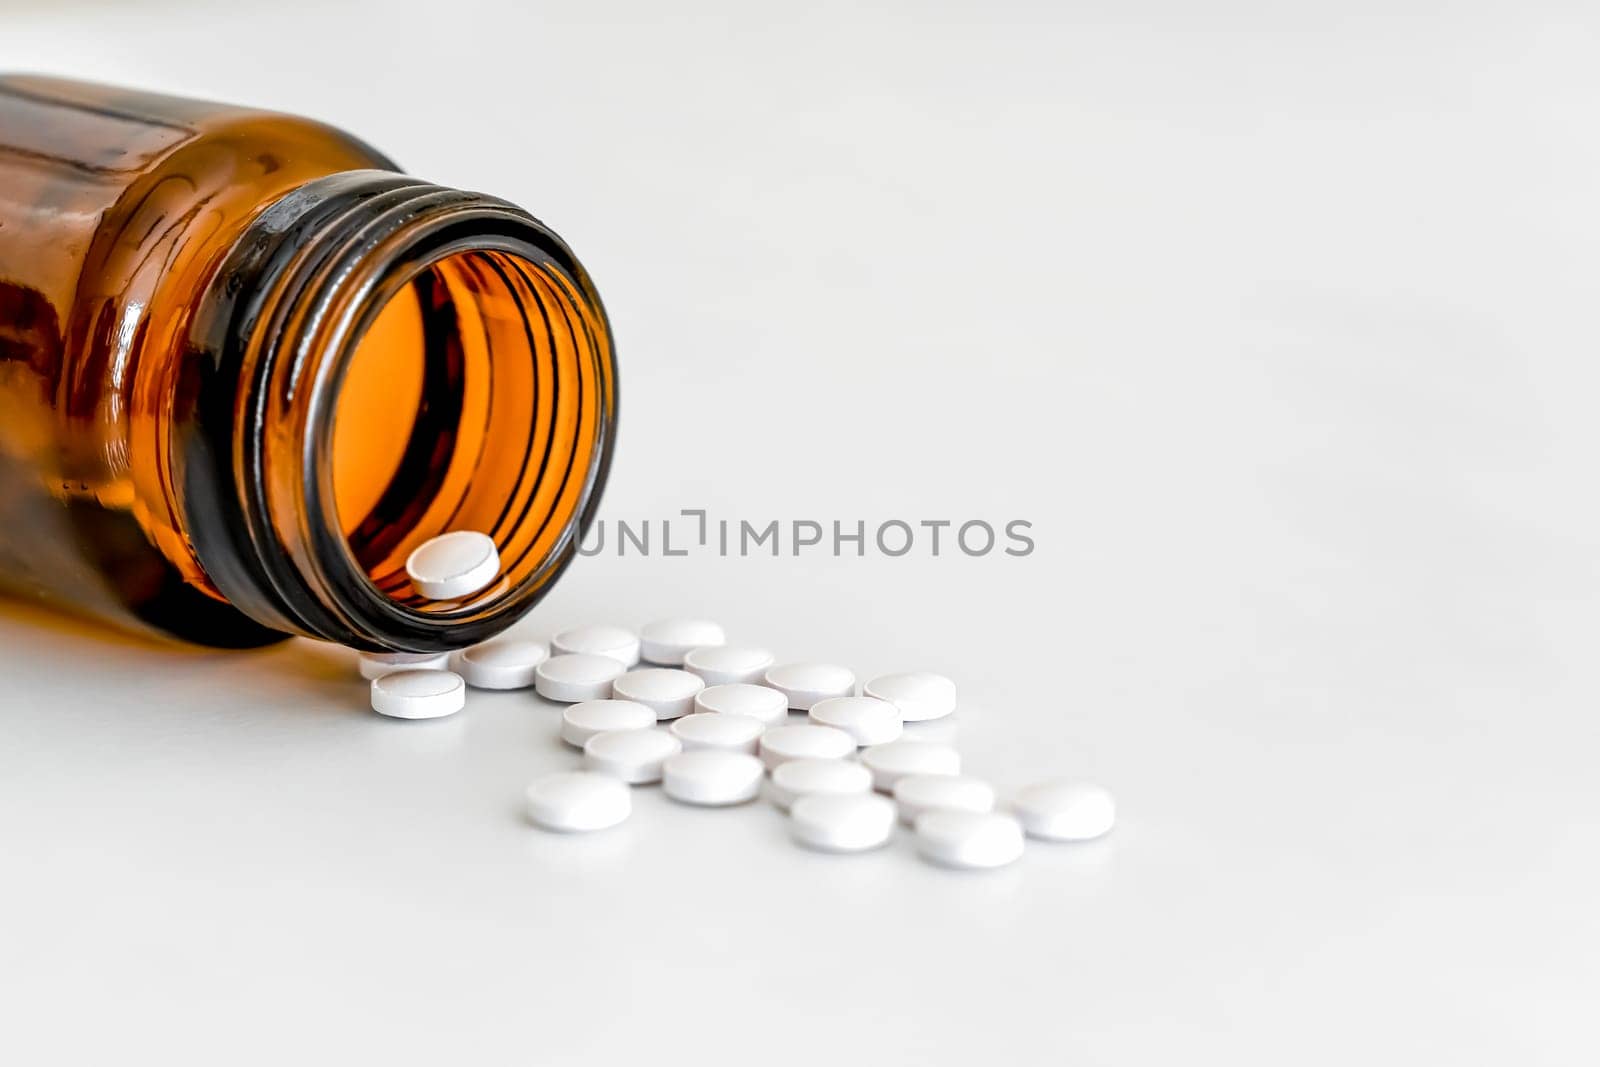 Scattered White Round vitamins and Brown Glass Bottle on White Background, Copy Space, Close-Up, Healthcare Concept.